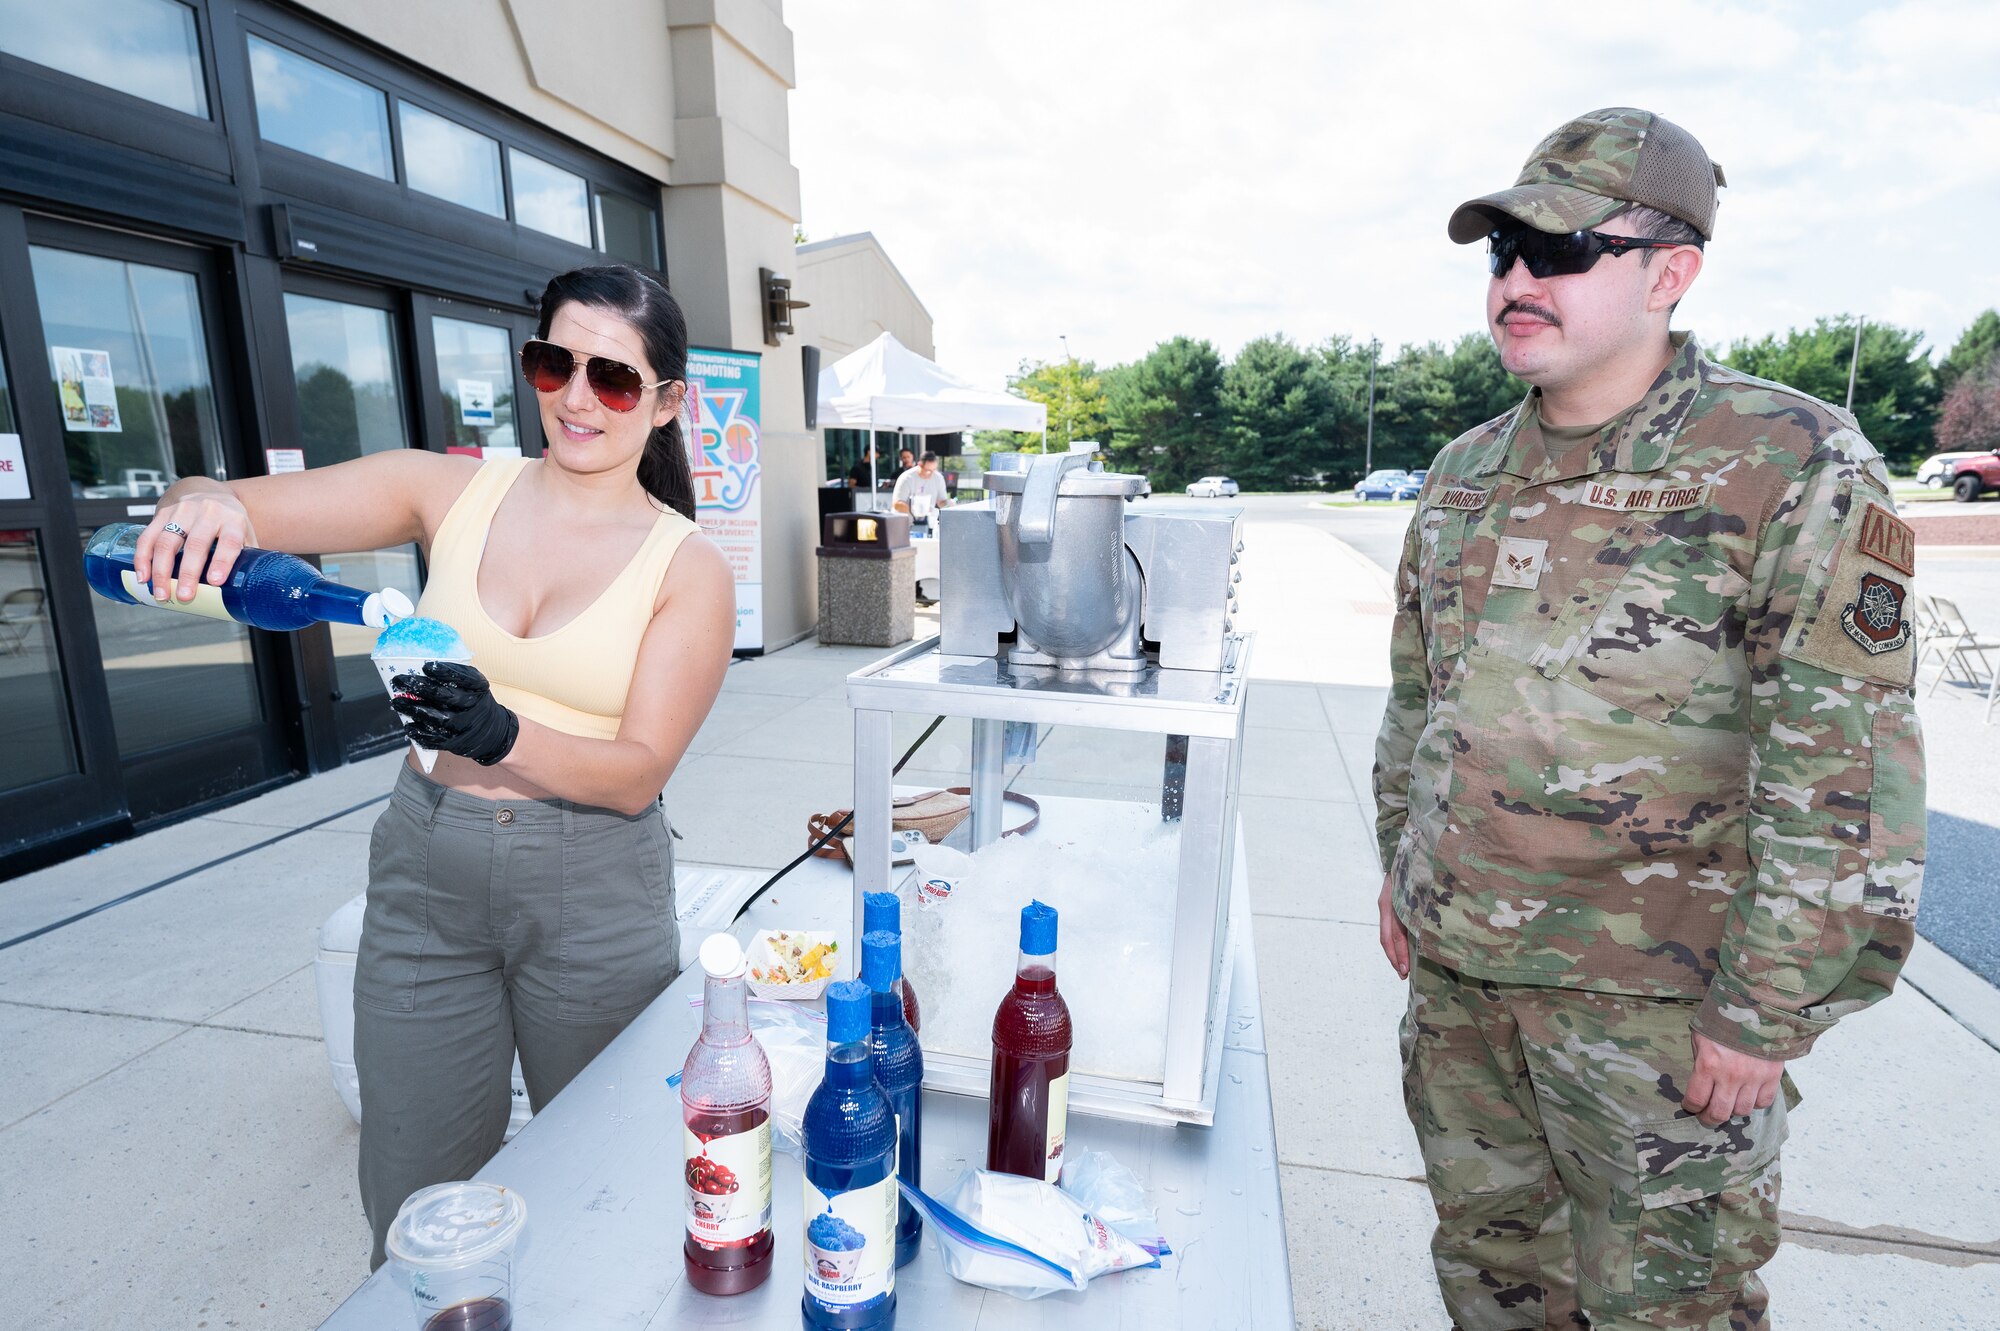 Tech. Sgt. Alicia Garcia, 436th Force Support Squadron Airman Leadership School commandant, serves snow cones at the Hispanic Heritage Month Block Party on Dover Air Force Base, Delaware, Sept. 15, 2022. The annual event kicks off a series of events on Dover AFB that celebrate Hispanic Heritage Month. (U.S. Air Force photo by Mauricio Campino)